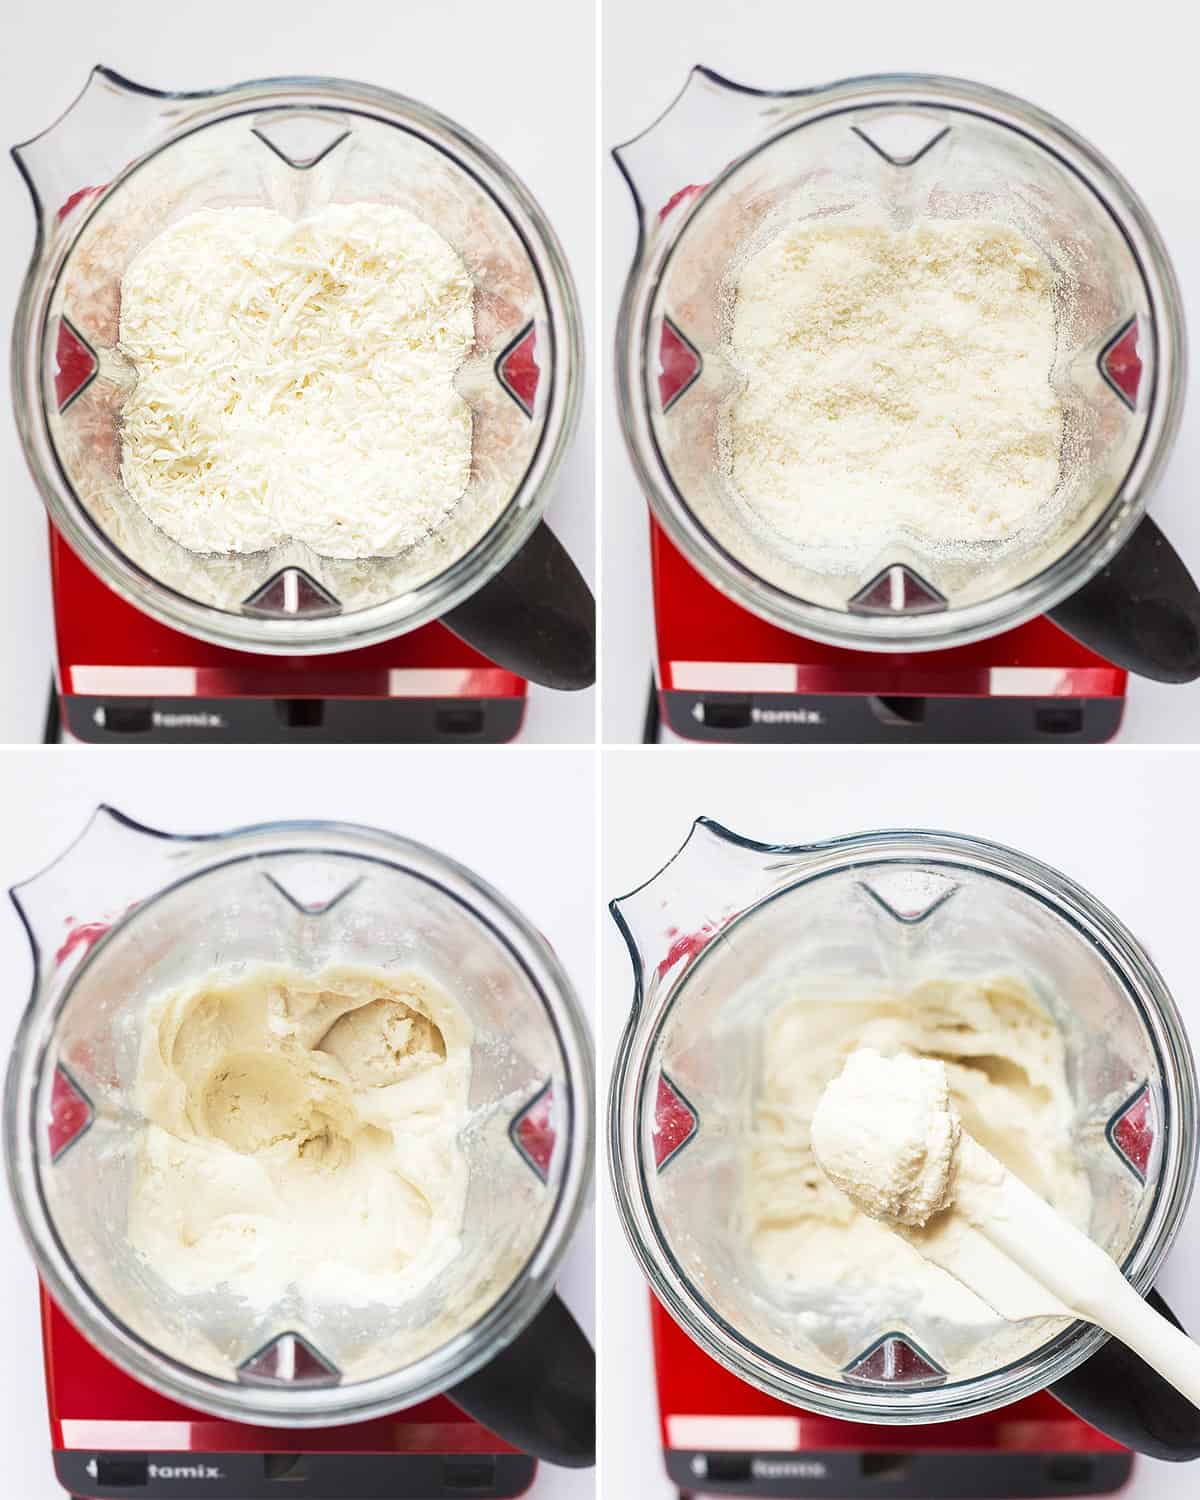 Stages of homemade coconut butter in a blender